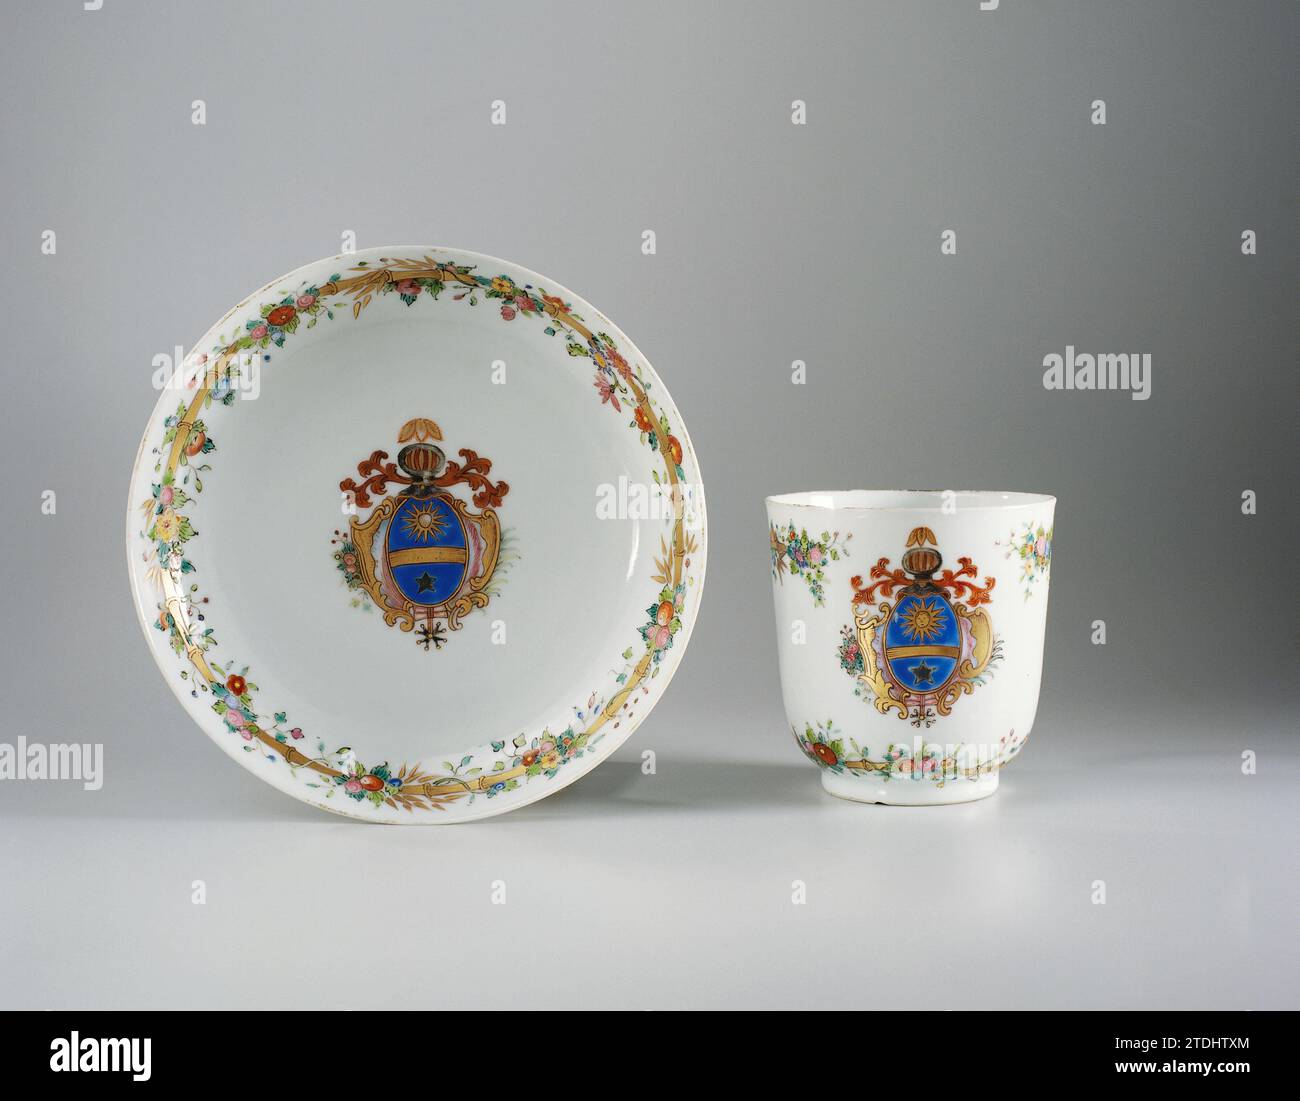 Cup with handle with a coat of arms and bamboo border with floral scrolls, anonymous, c. 1750 - c. 1774 Porcelain ear head, painted on the glaze in blue, red, pink, green, yellow, black and gold. On the wall an unidentified family crest with a sun with a face, a star and a gold beam on a blue background. The weapon is surrounded by leaf vines, a palm branch and flower branch. On the top and bottom edge a bamboo band with flower vines. A chip in the edge of the head. Weapon porcelain with email colors. China porcelain. glaze. gold (metal) painting / gilding / vitrification Porcelain ear head, p Stock Photo